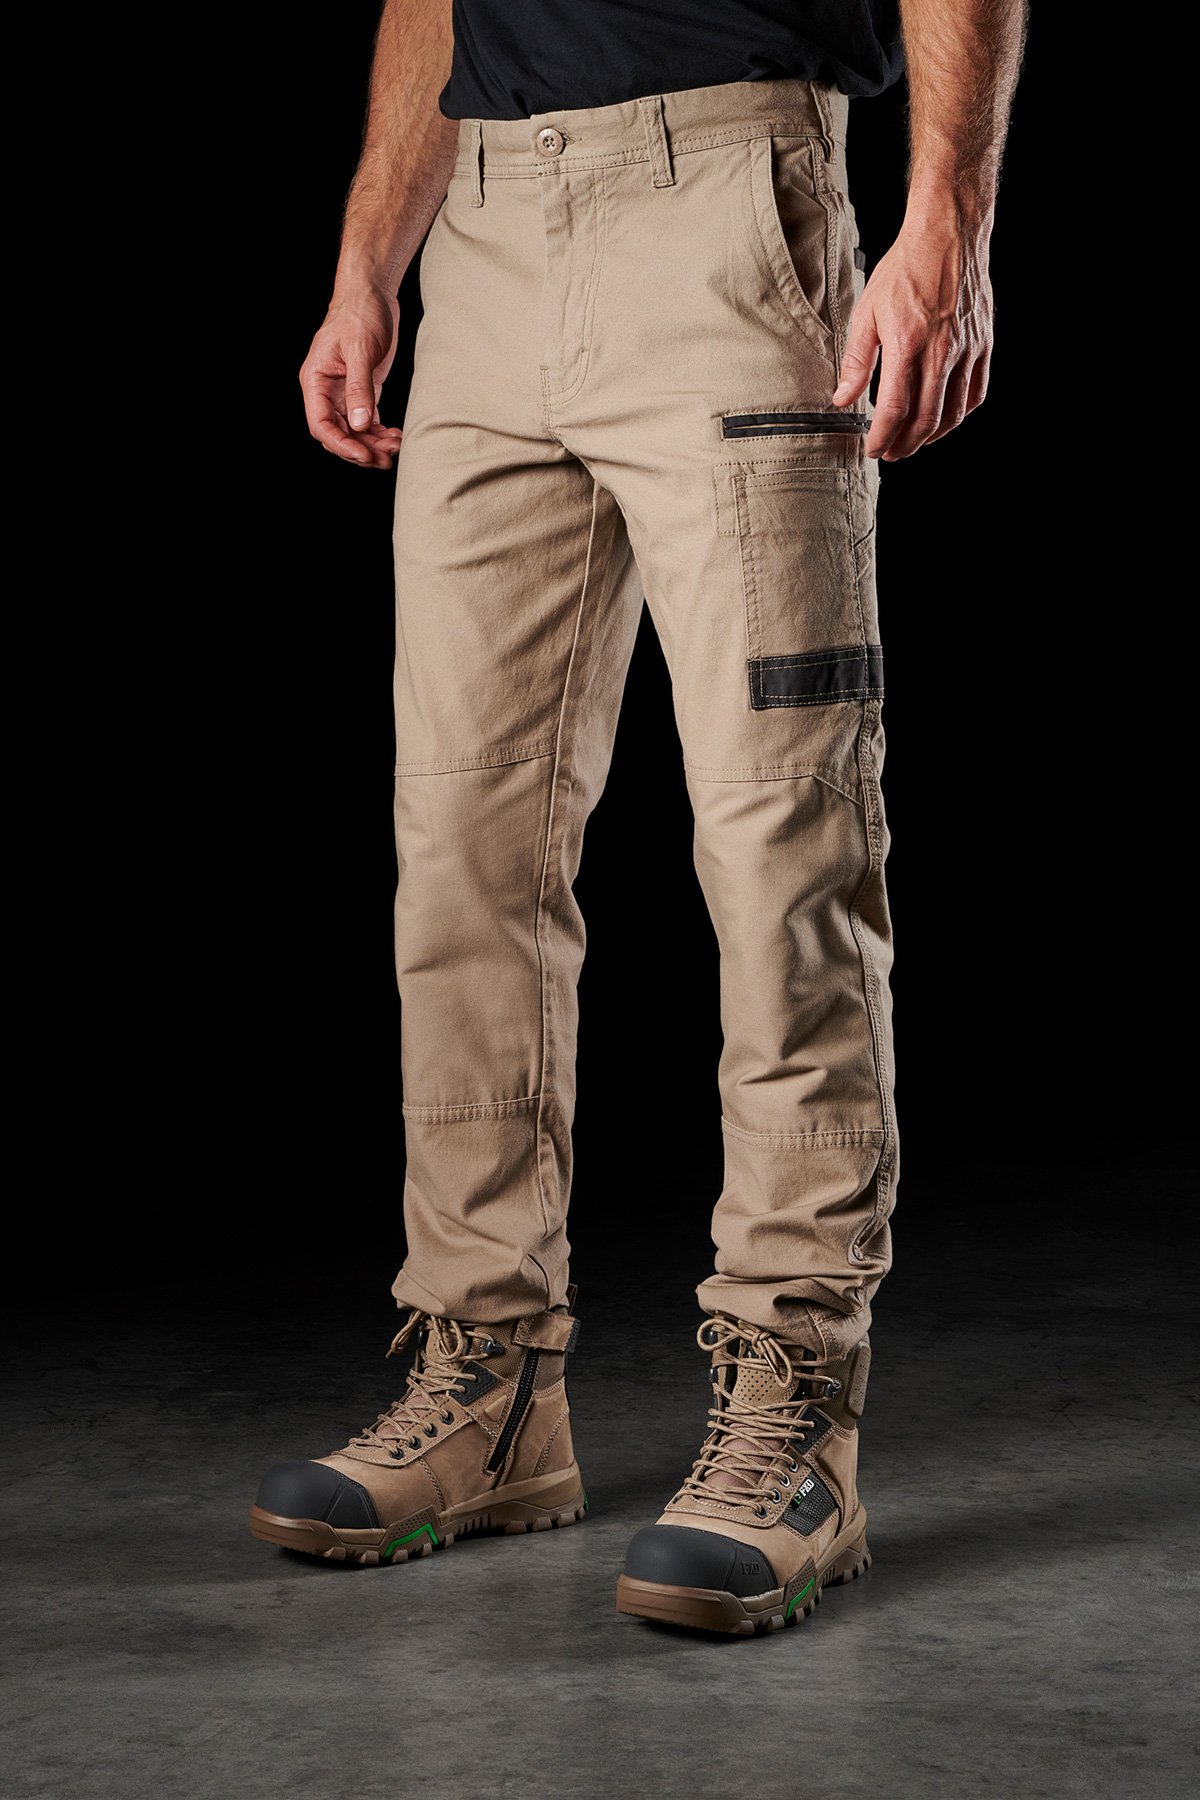 FXD Mens Pants WP3 – Top Quality Work Wear